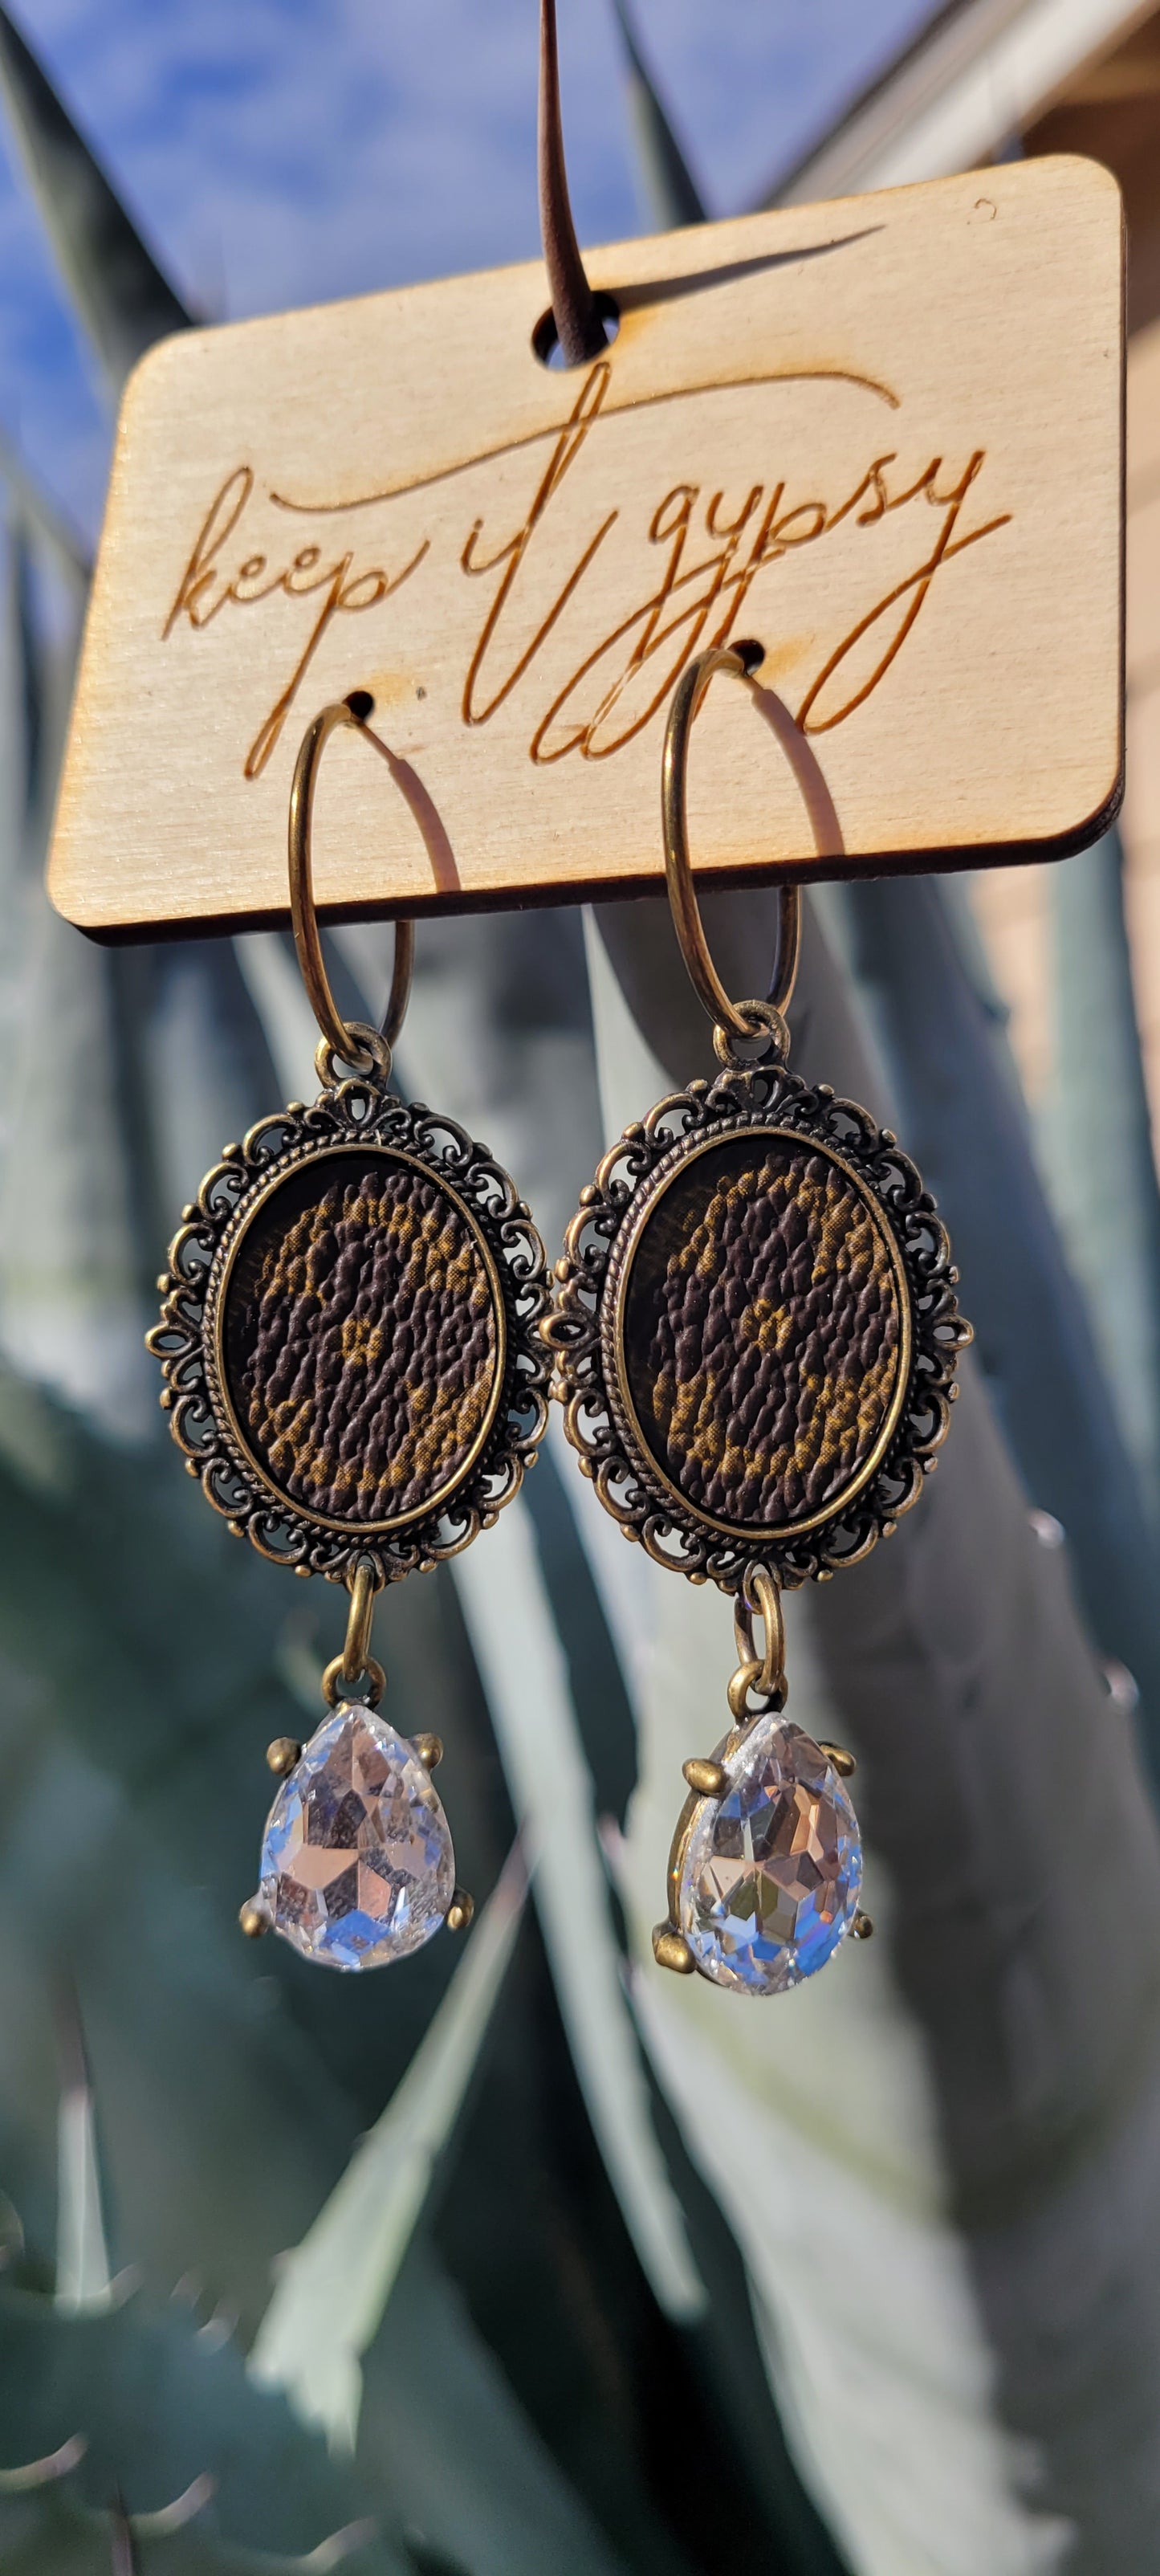 Upcycled Earrings Brown with Clear Crystal  Limited supply!    Due to the nature of leather/suede, small variances of color in the skin may occur, this is in no way considered a defect. These are inherent characteristics of leather/suede and will enhance the individual look of your garment.